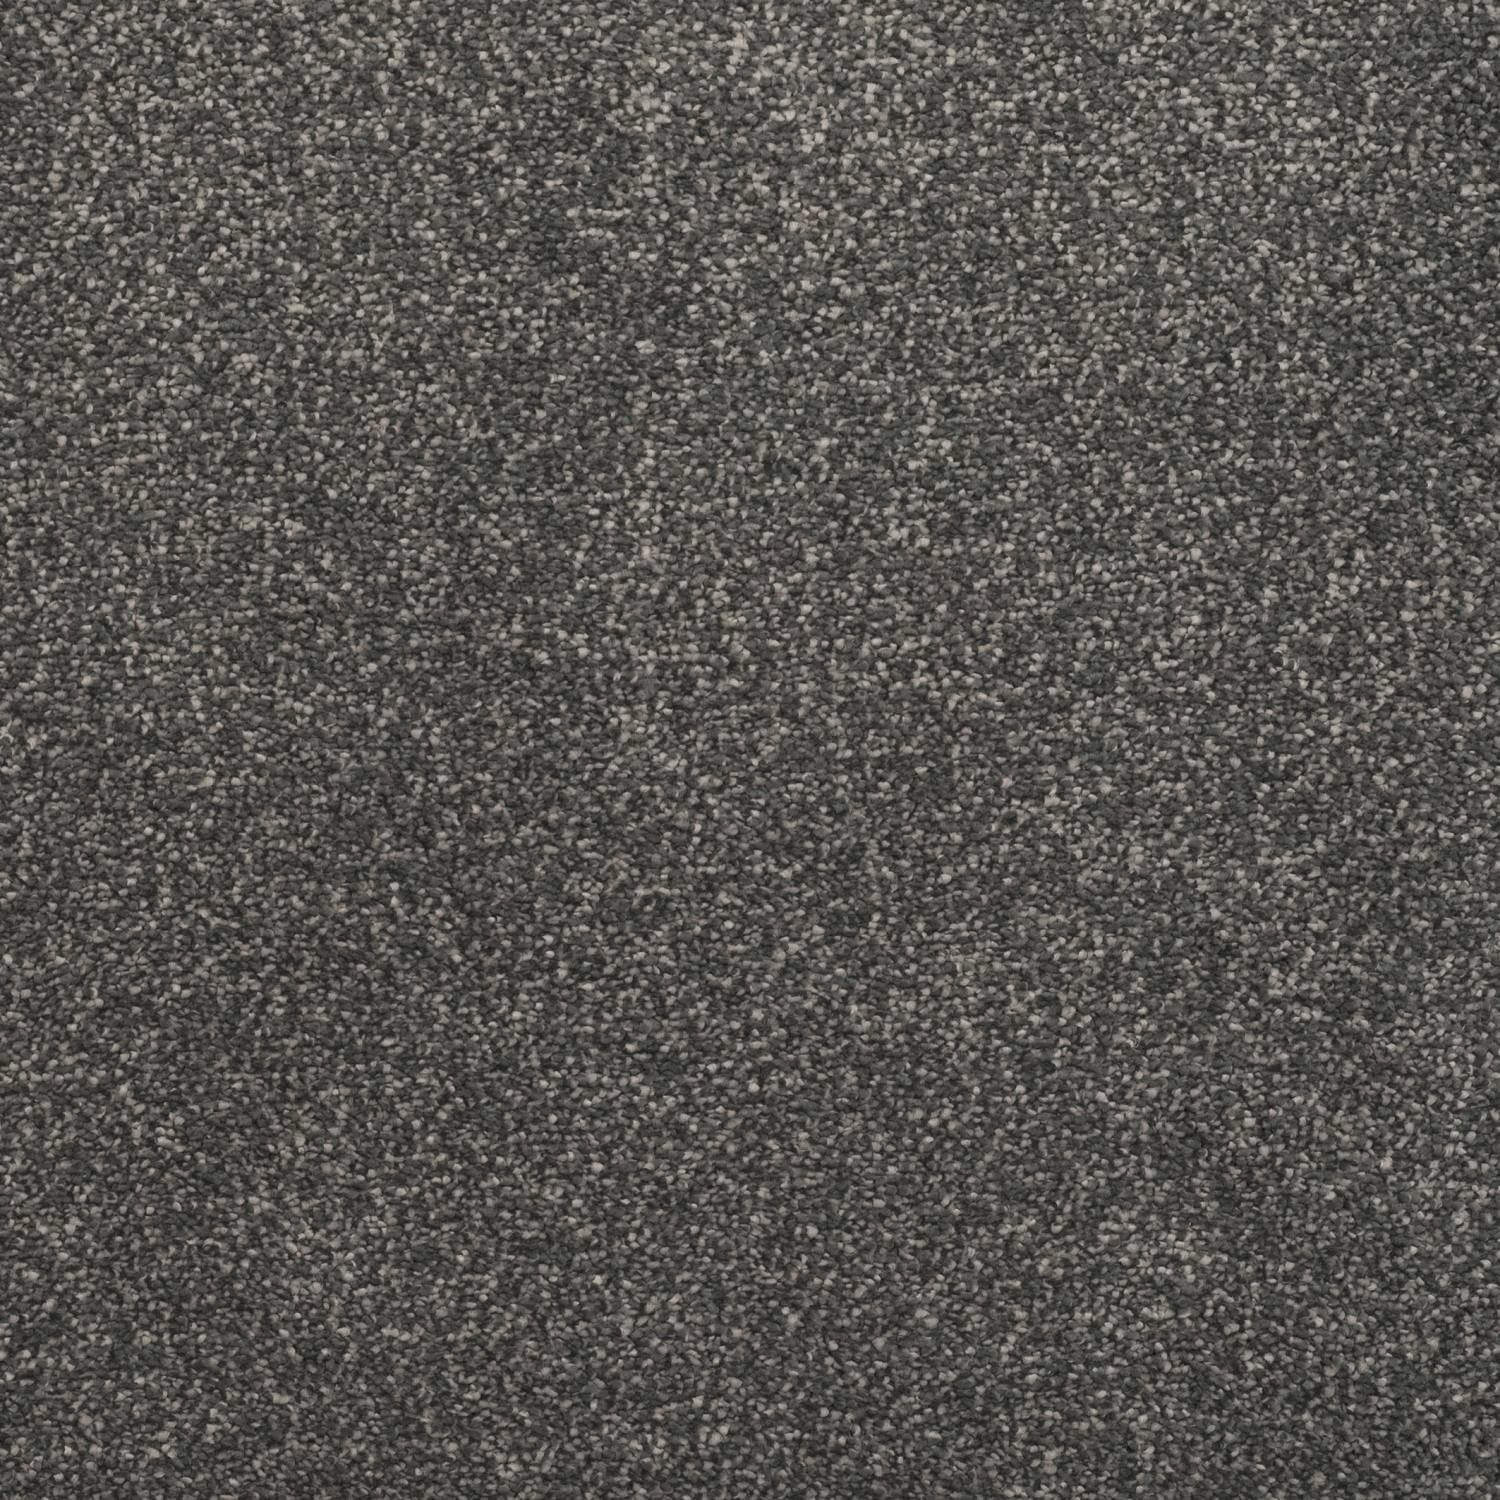 Obsession Twist Luxury Deep Pile Carpet - 734 Ashes